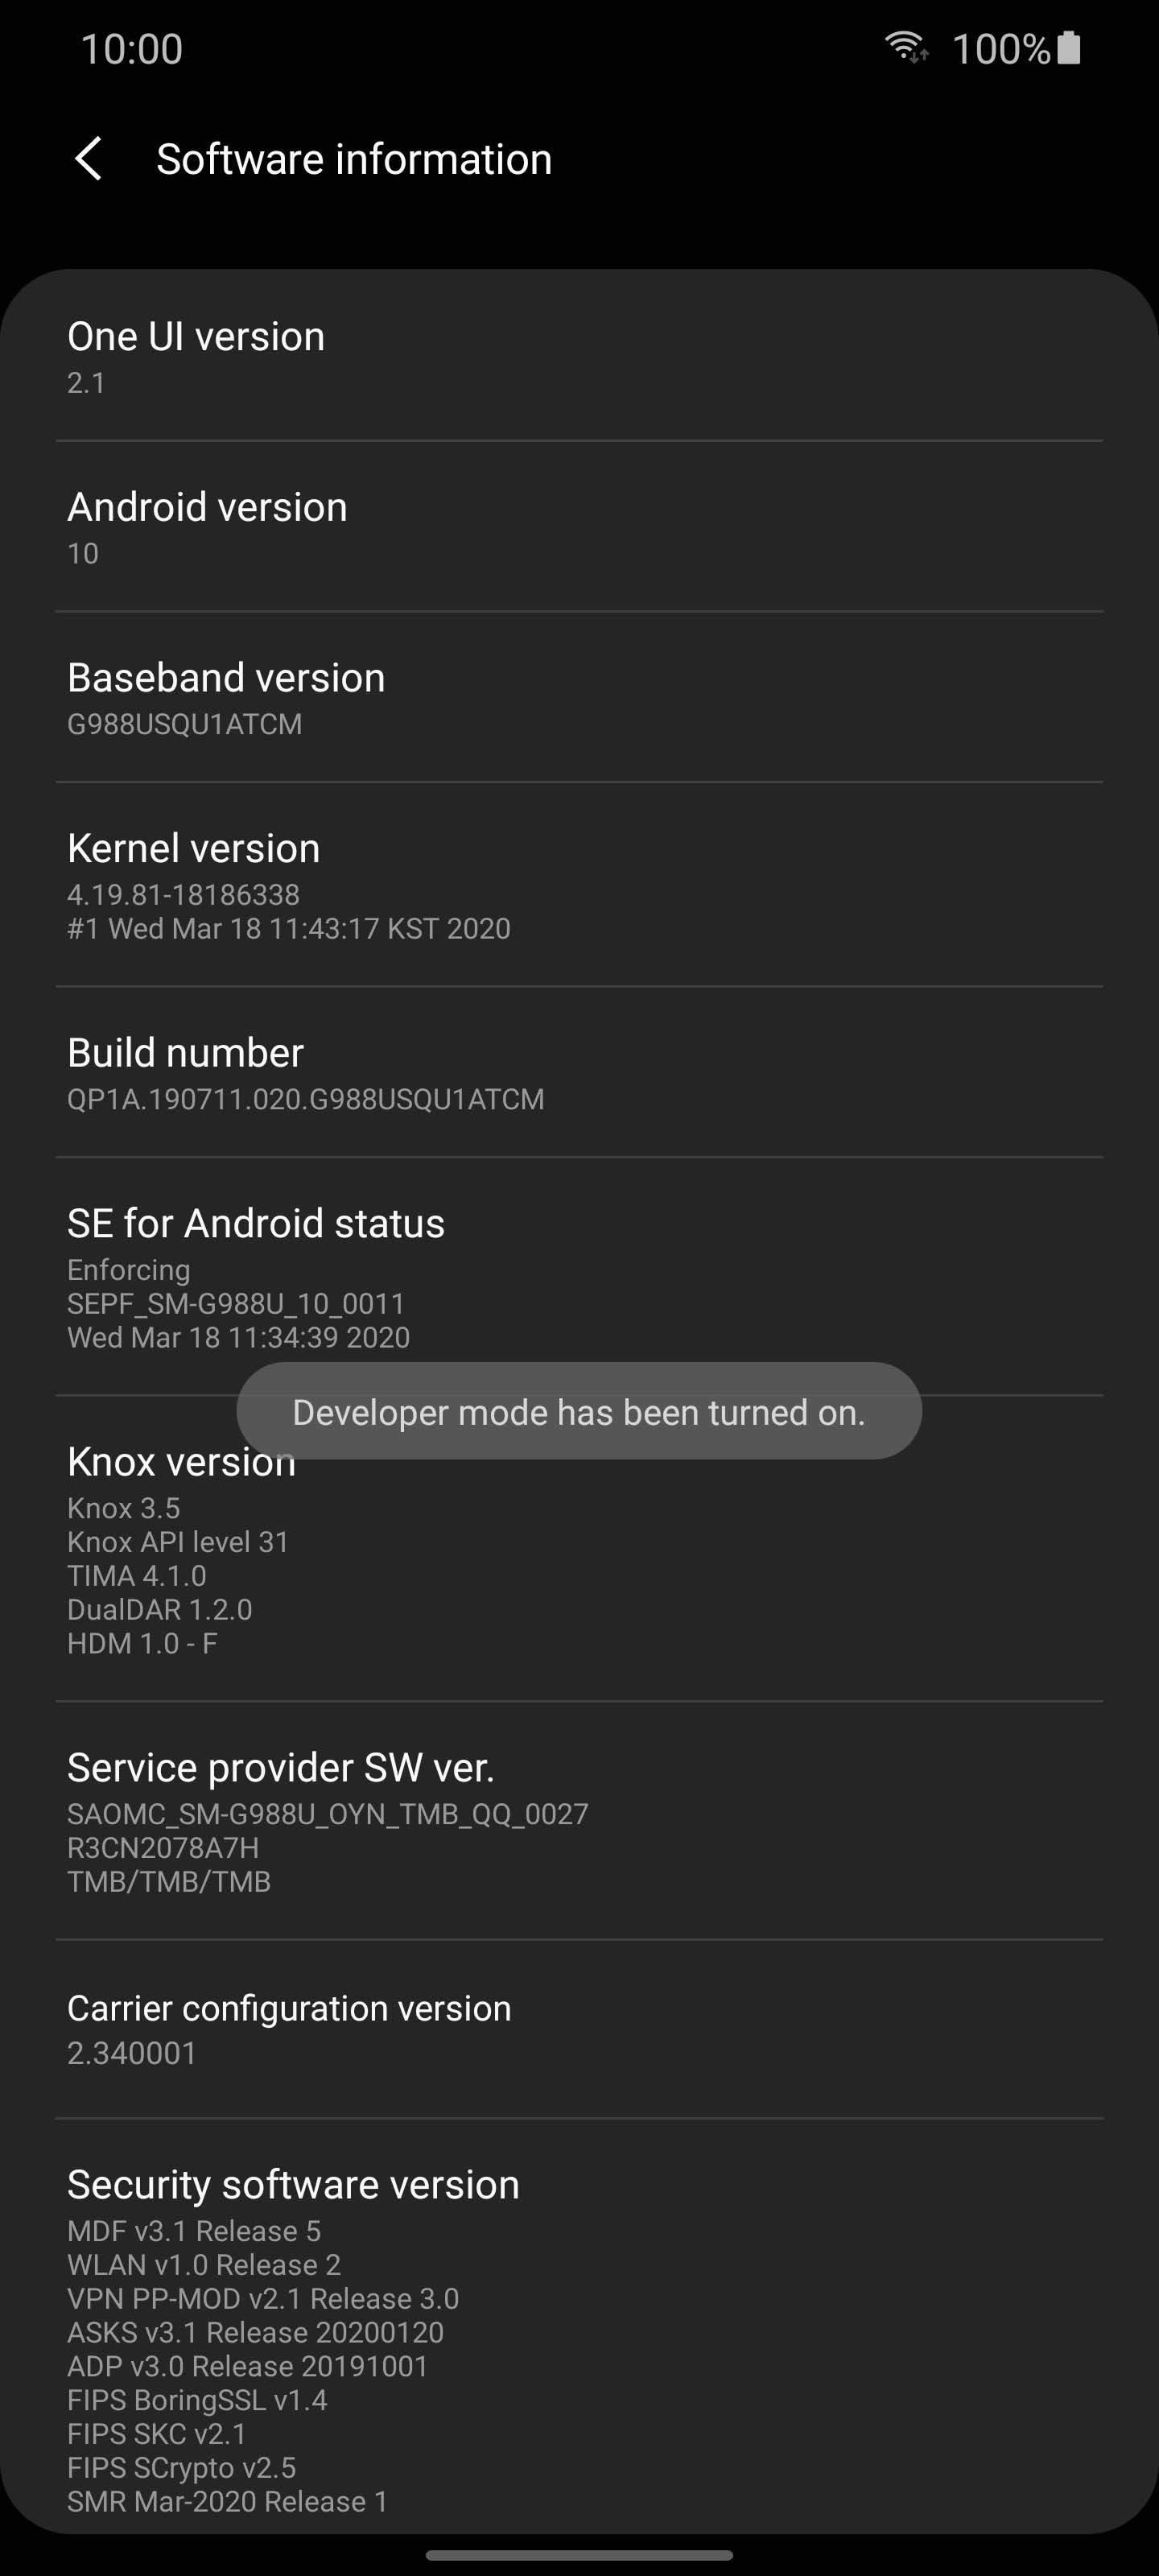 How to Activate Developer Options on Your Galaxy S20, S20+, or S20 Ultra